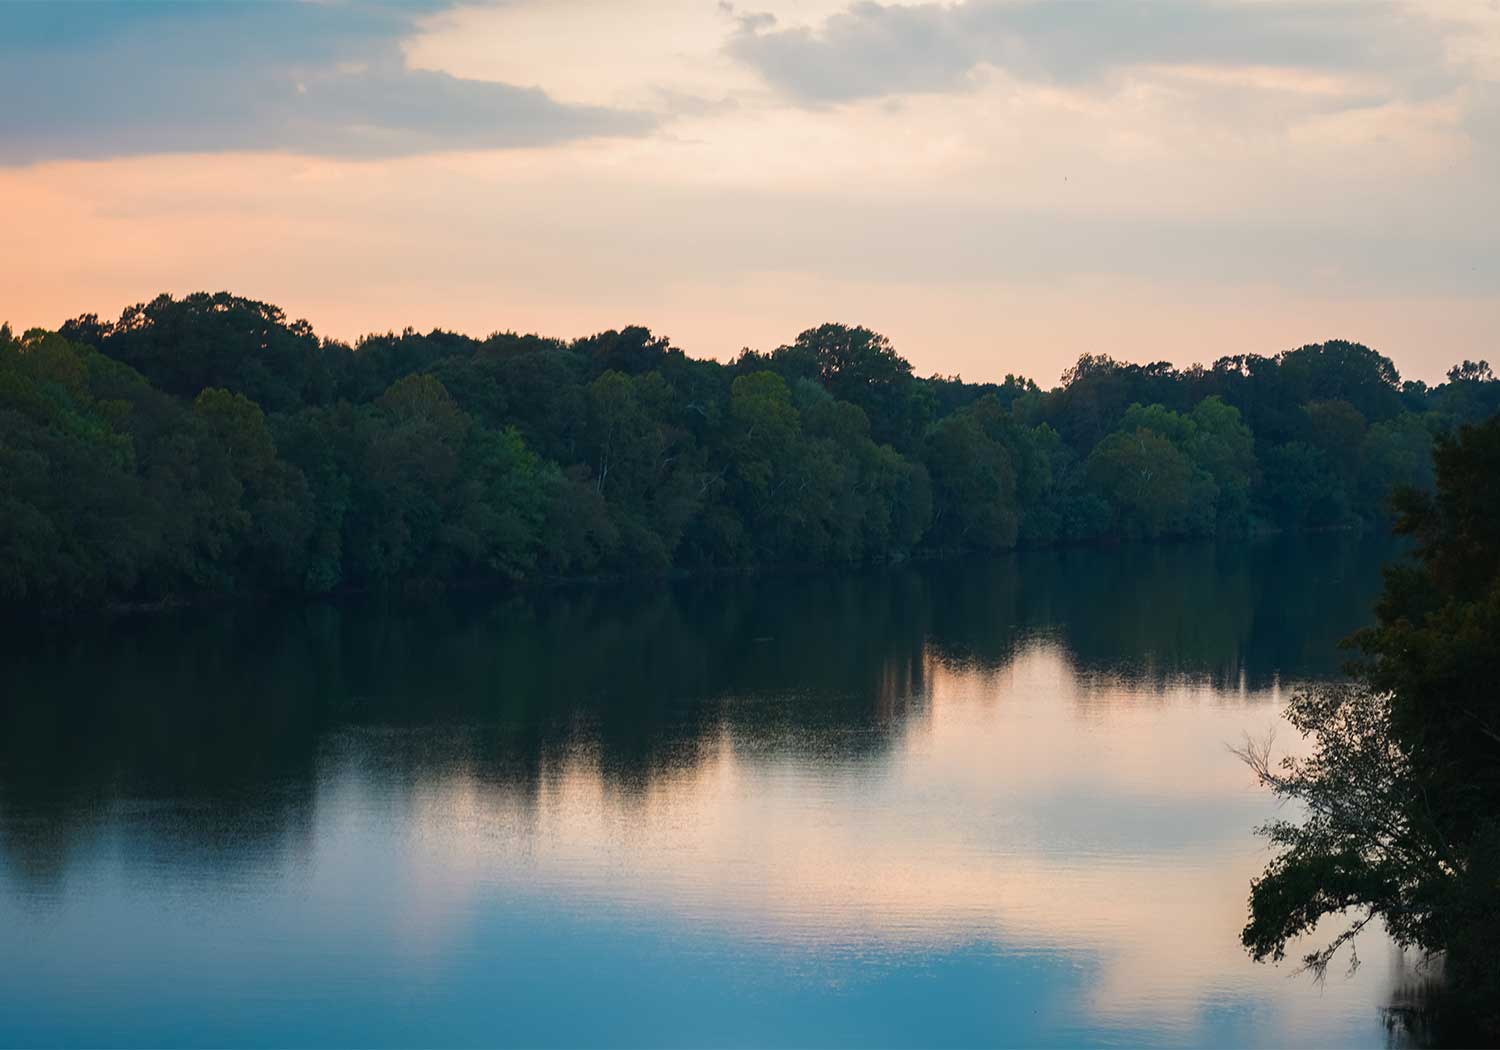 The Alabama River at sunset, with the light pink sky reflected in the water and dense green foliage along the riverbank.